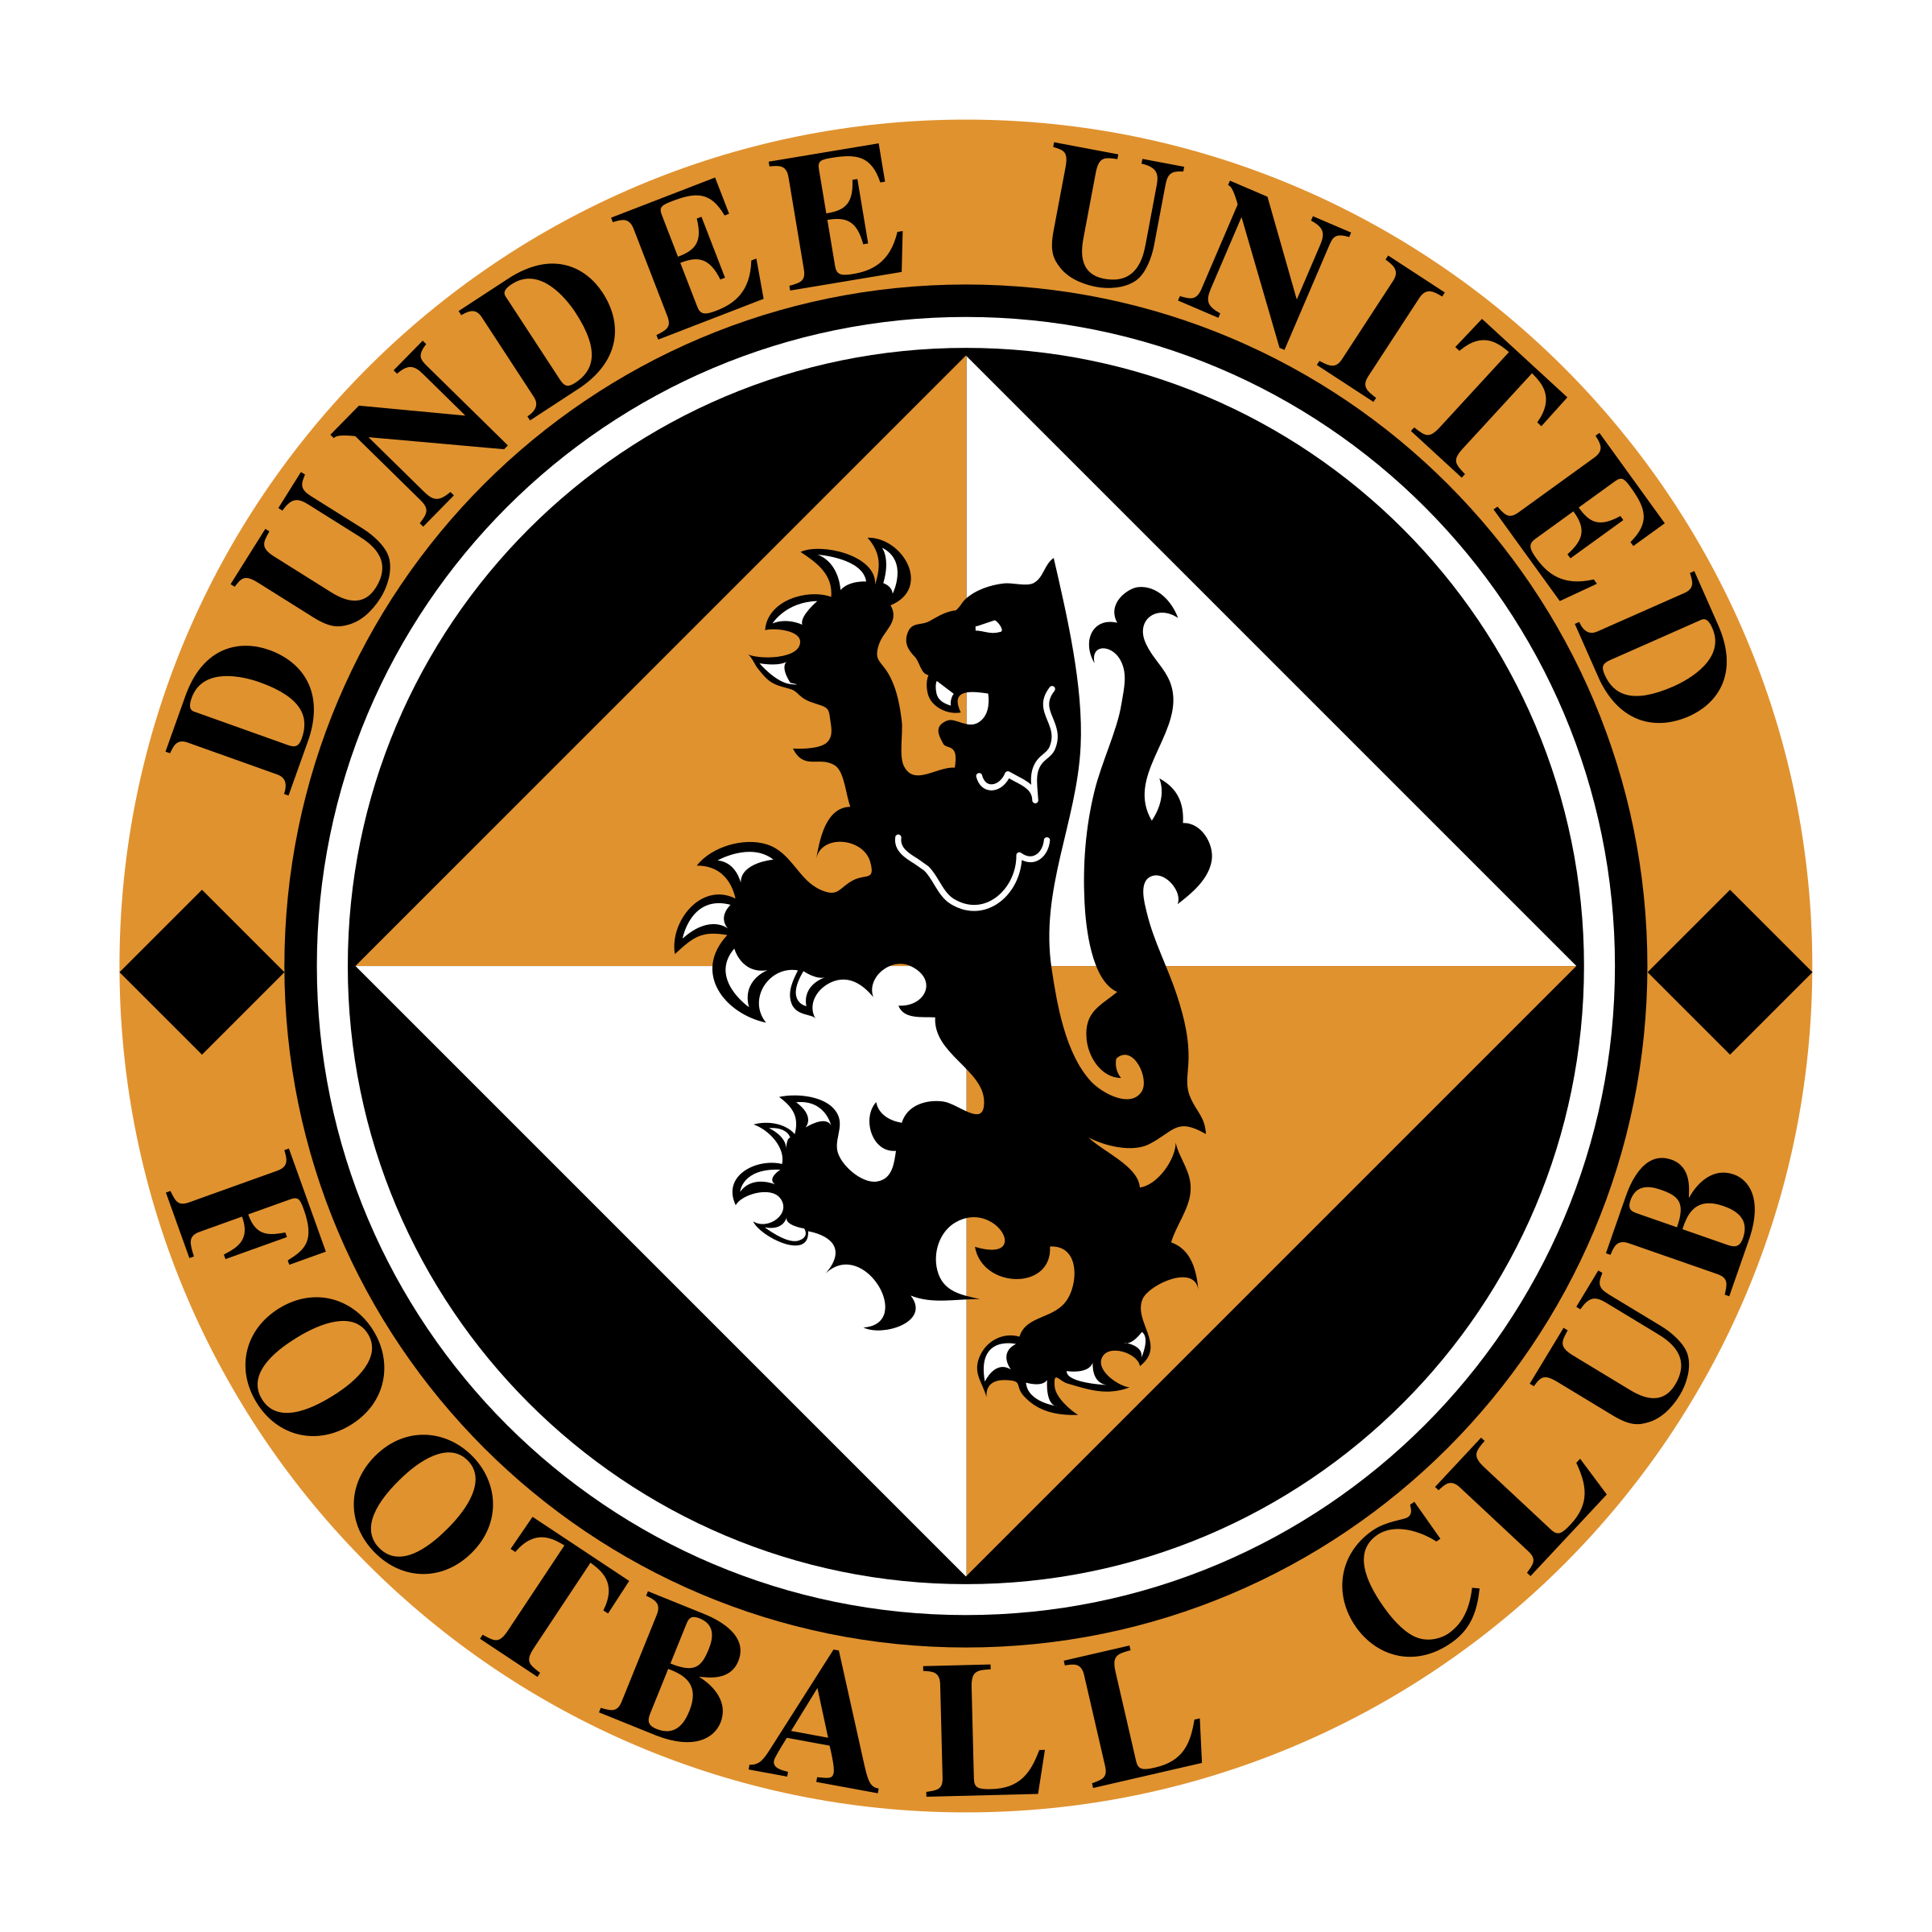 Dundee Logo - Dundee United Logo PNG Transparent & SVG Vector - Freebie Supply